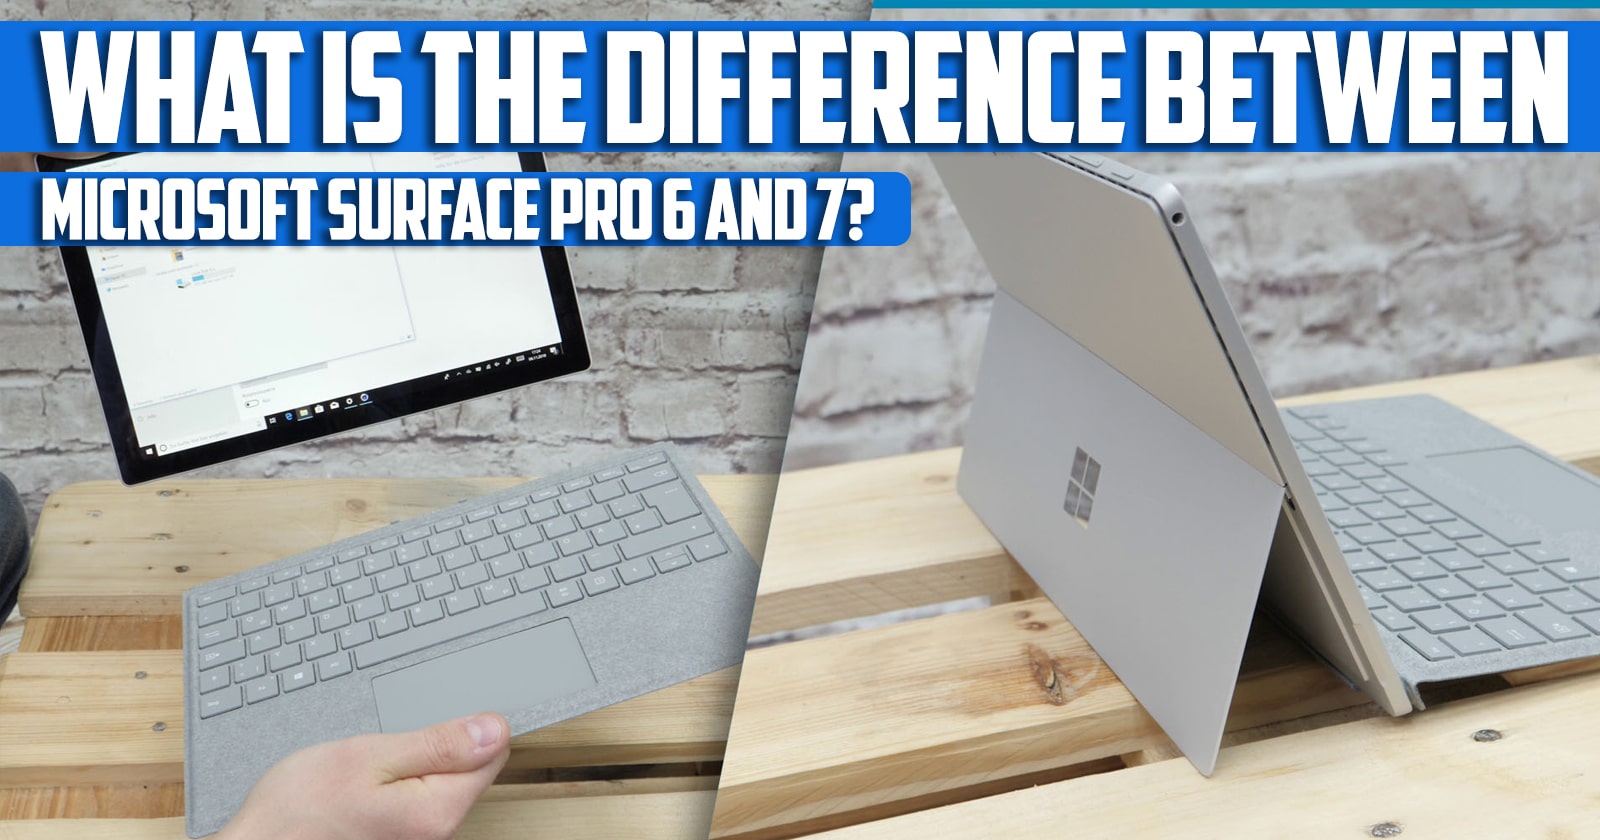 What is the difference between microsoft surface pro 6 and 7?